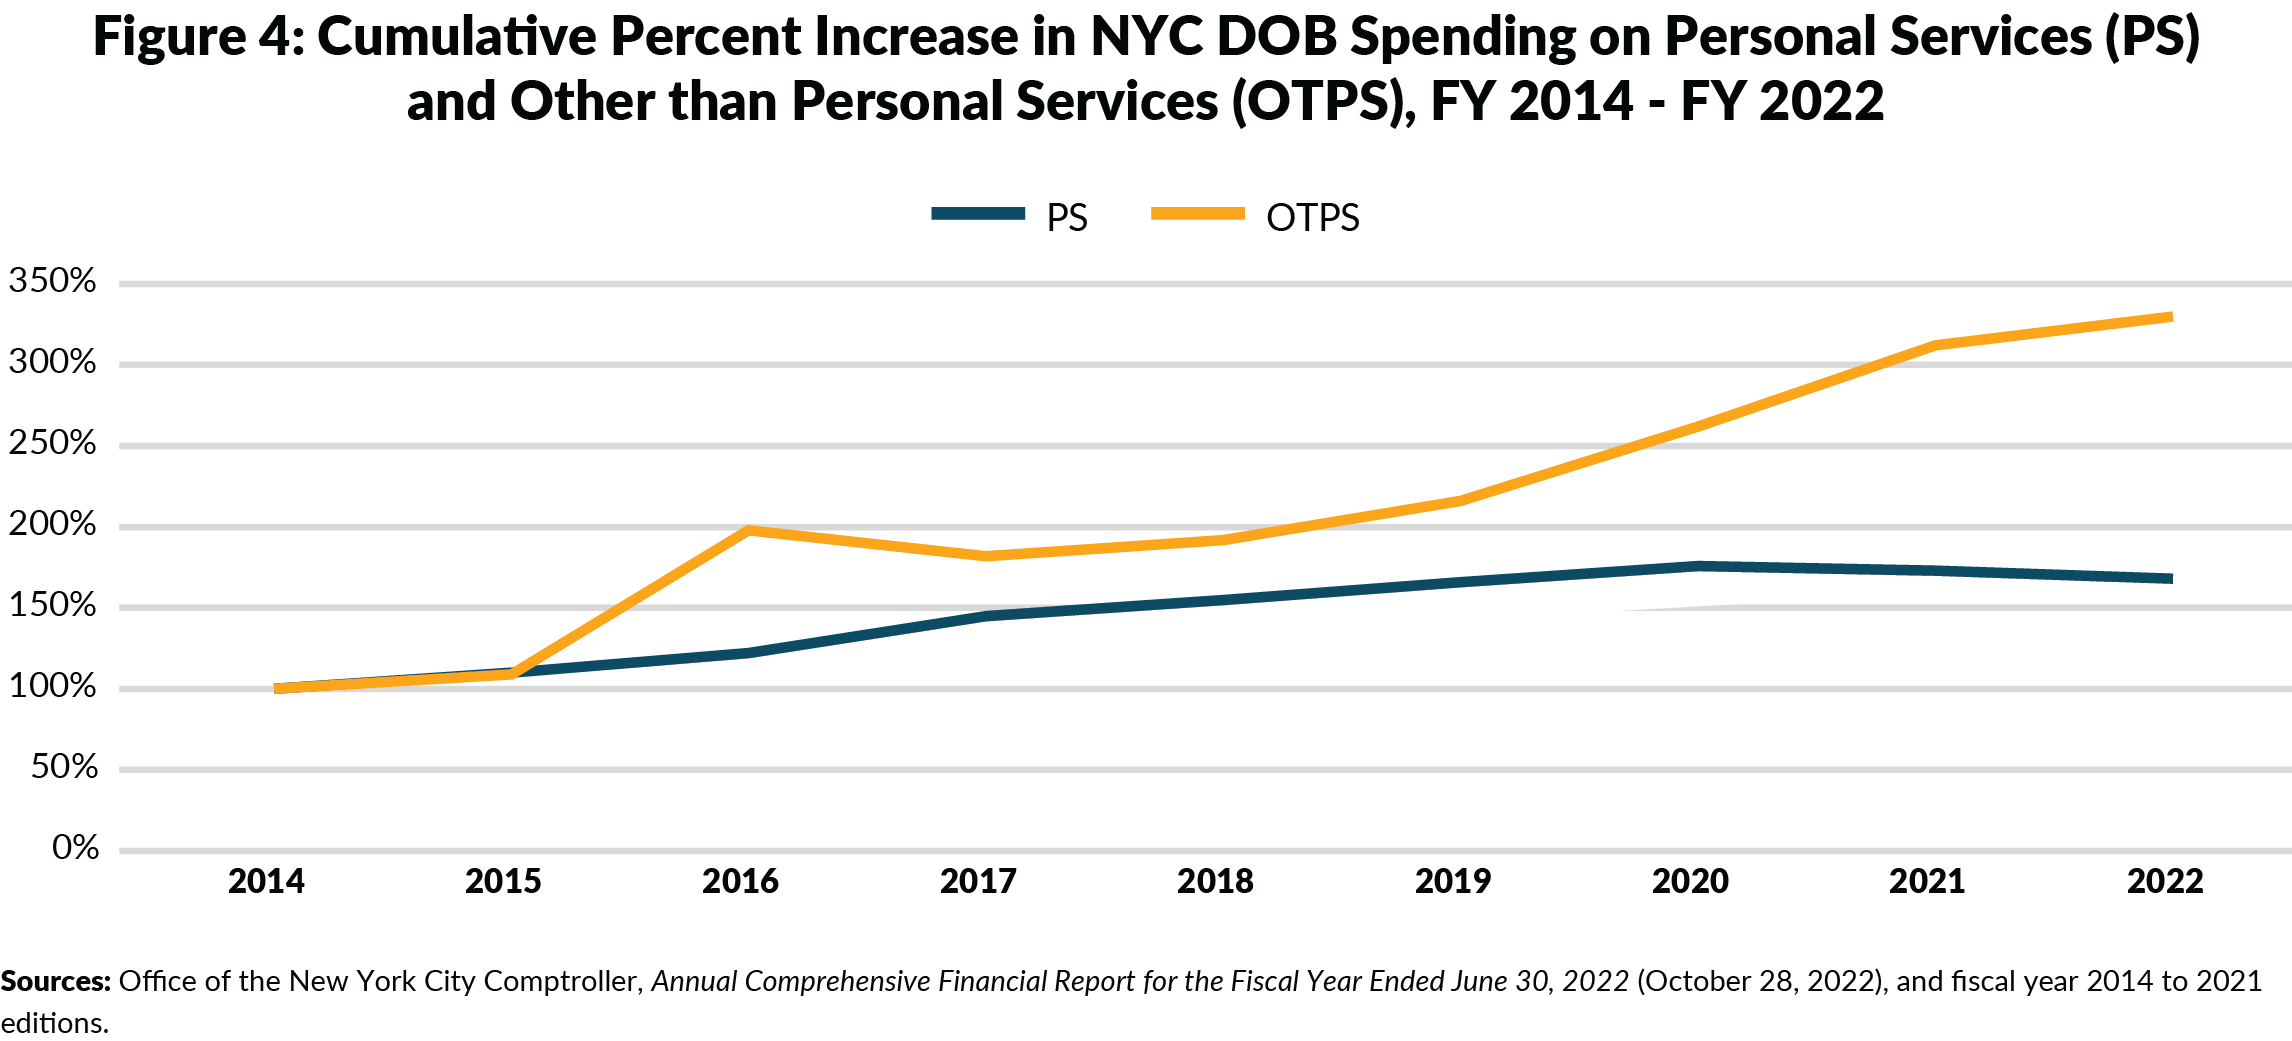 Figure 4: Cumulative Percent Increase in NYC DOB Spending on Personal Services (PS)and Other than Personal Services (OTPS), FY 2014 - FY 2022